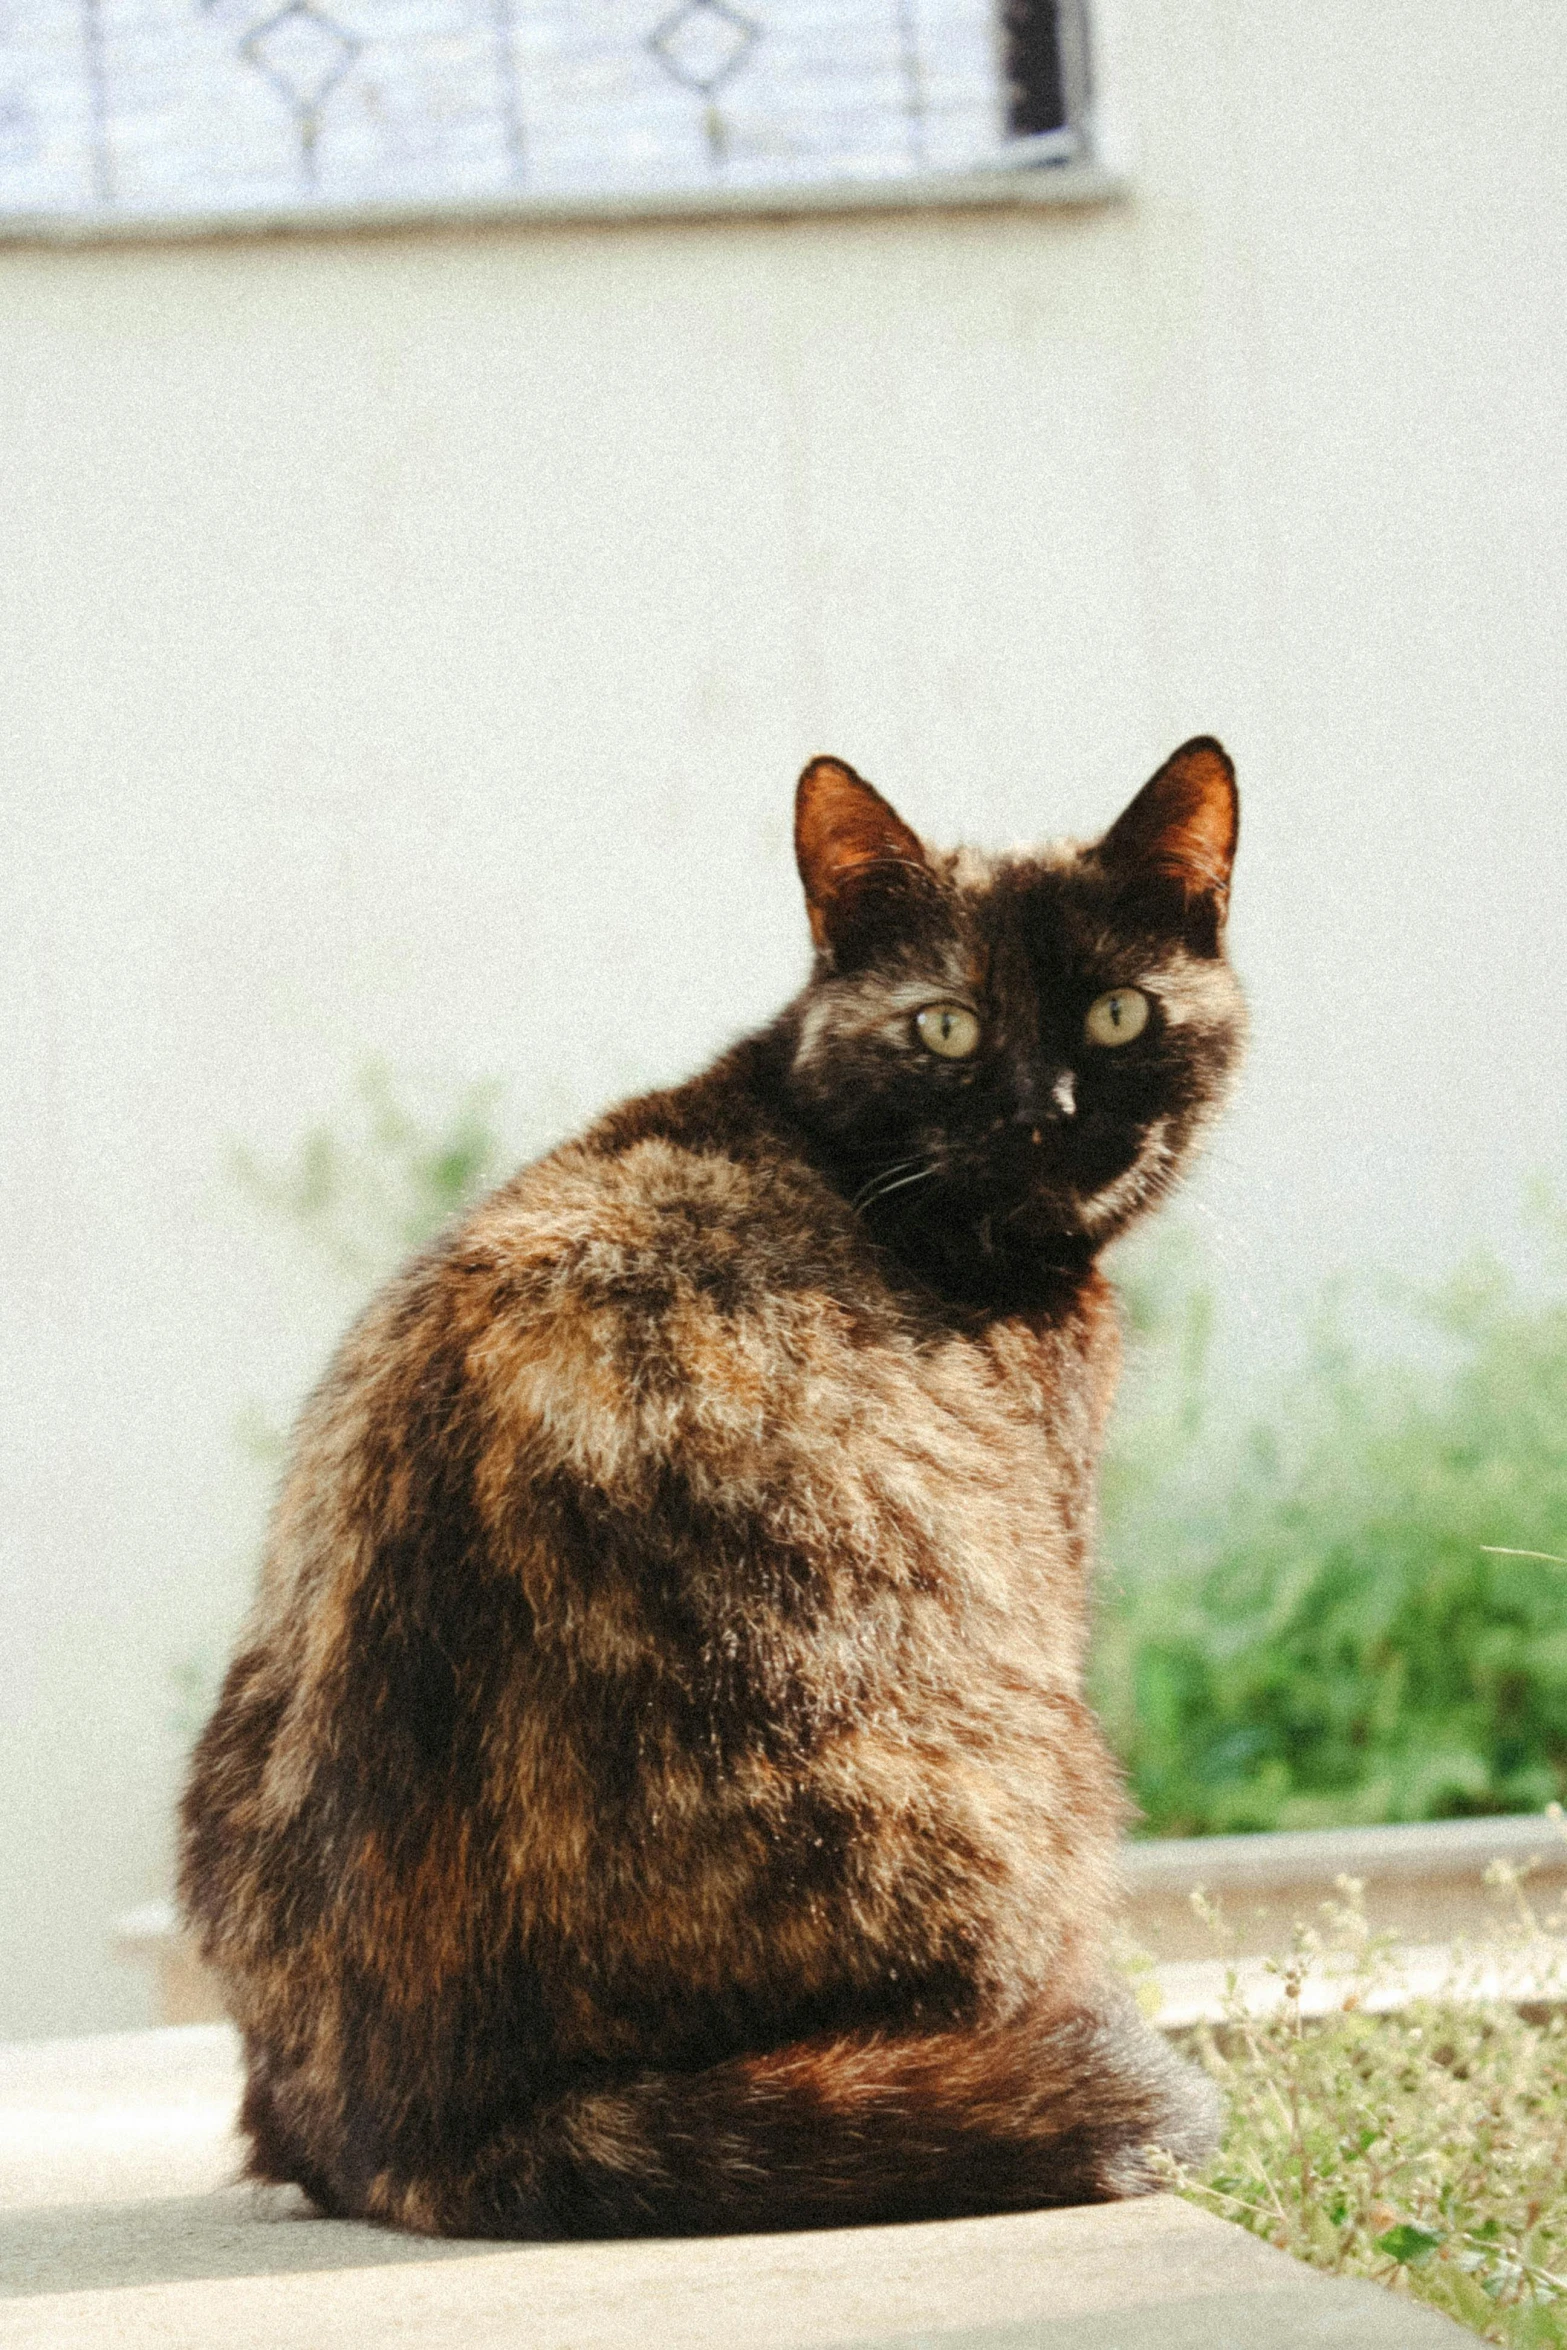 a black and brown cat sitting on a sidewalk, lomography lady grey, mottling coloring, tar - like, on display